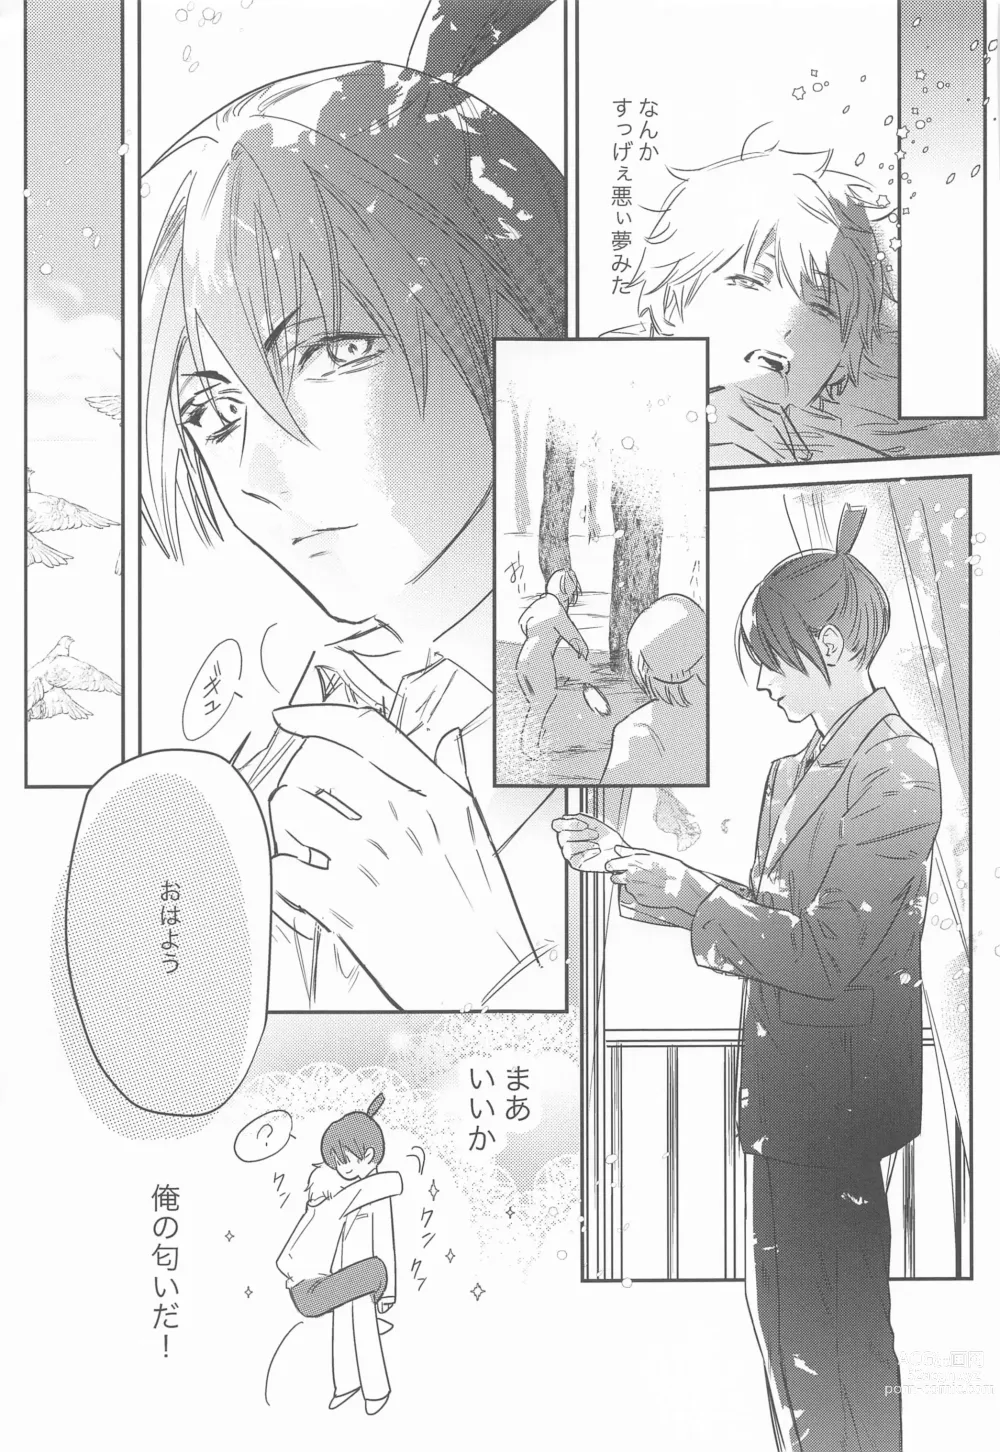 Page 24 of doujinshi Adazakura - Gone with the Blossoms